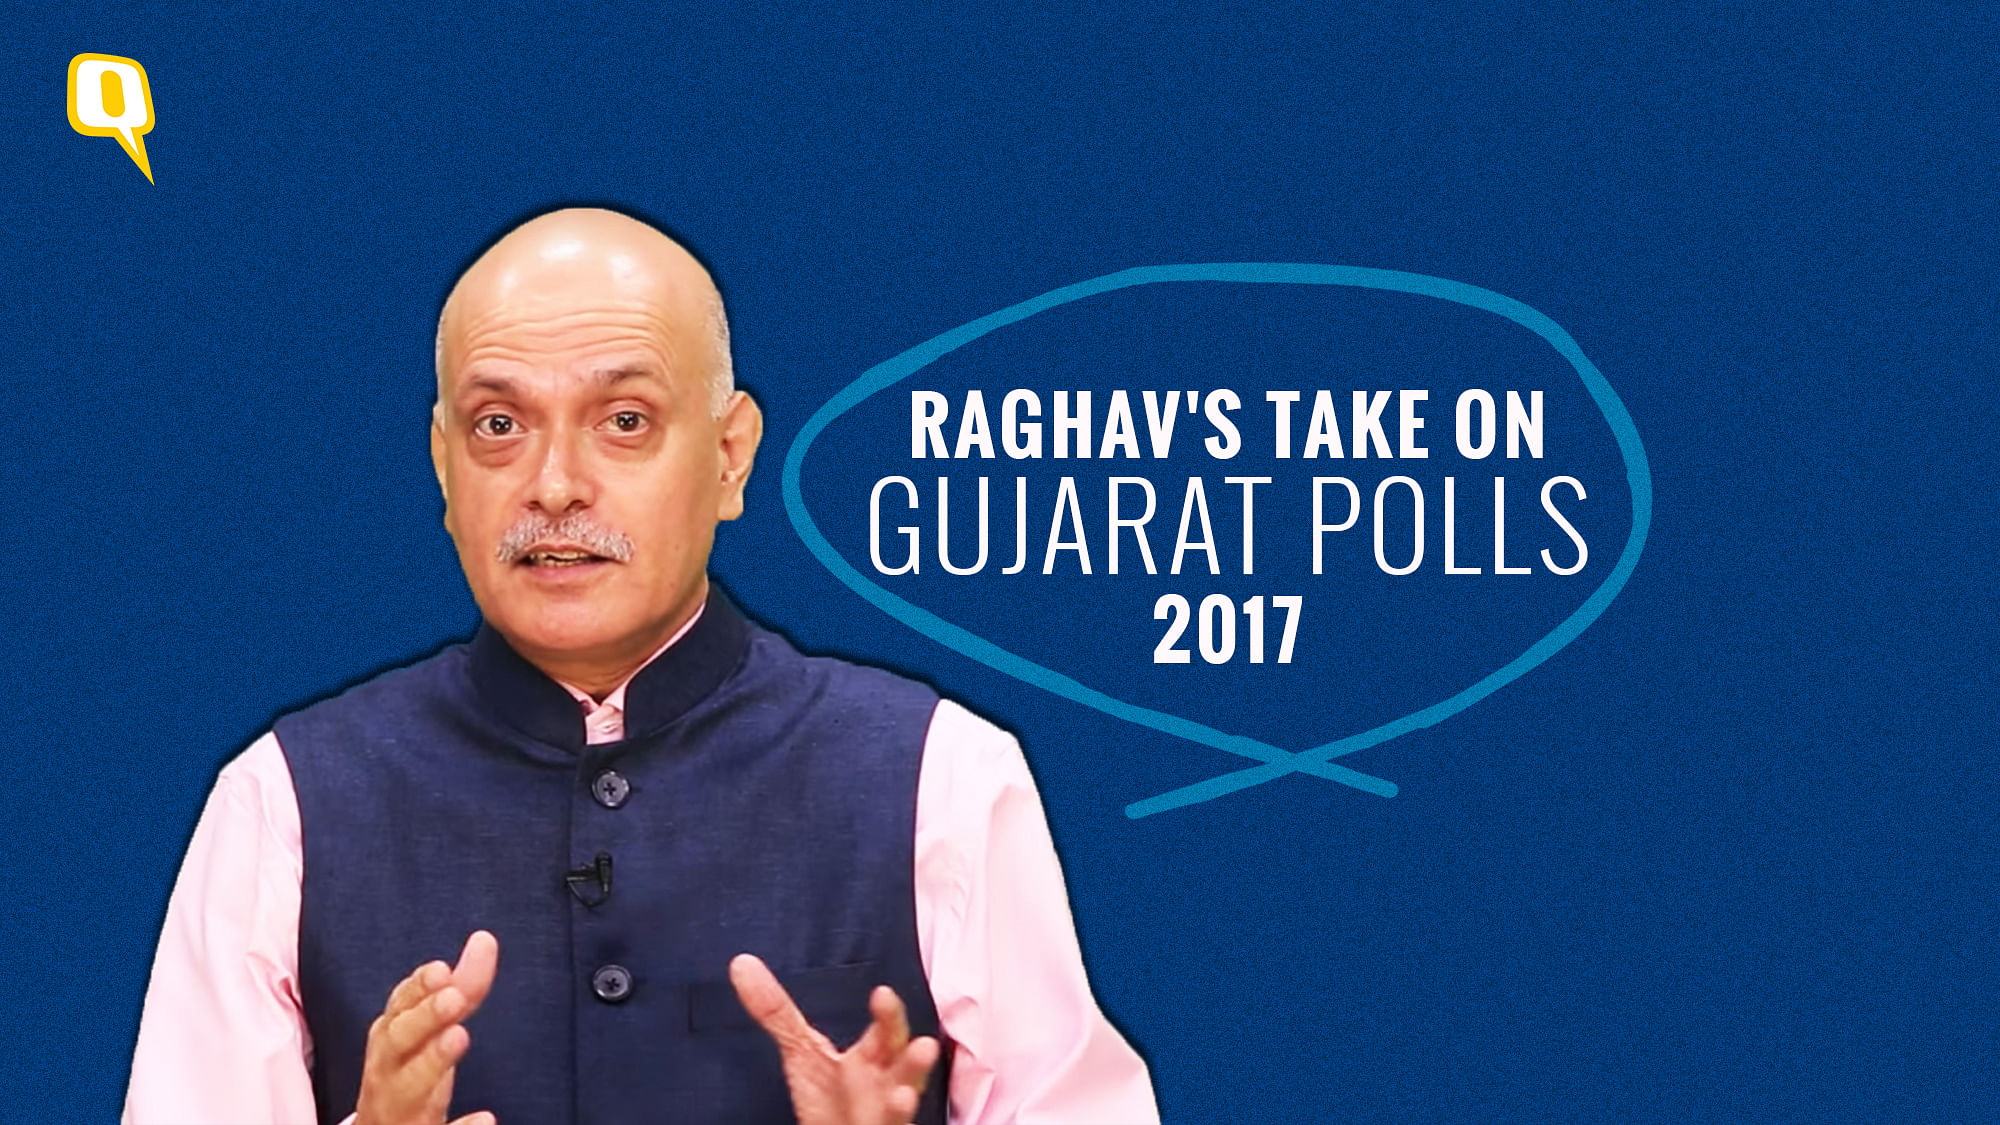 The Quint’s Founder Raghav Bahl gives us his take on the 2017 Gujarat Elections.